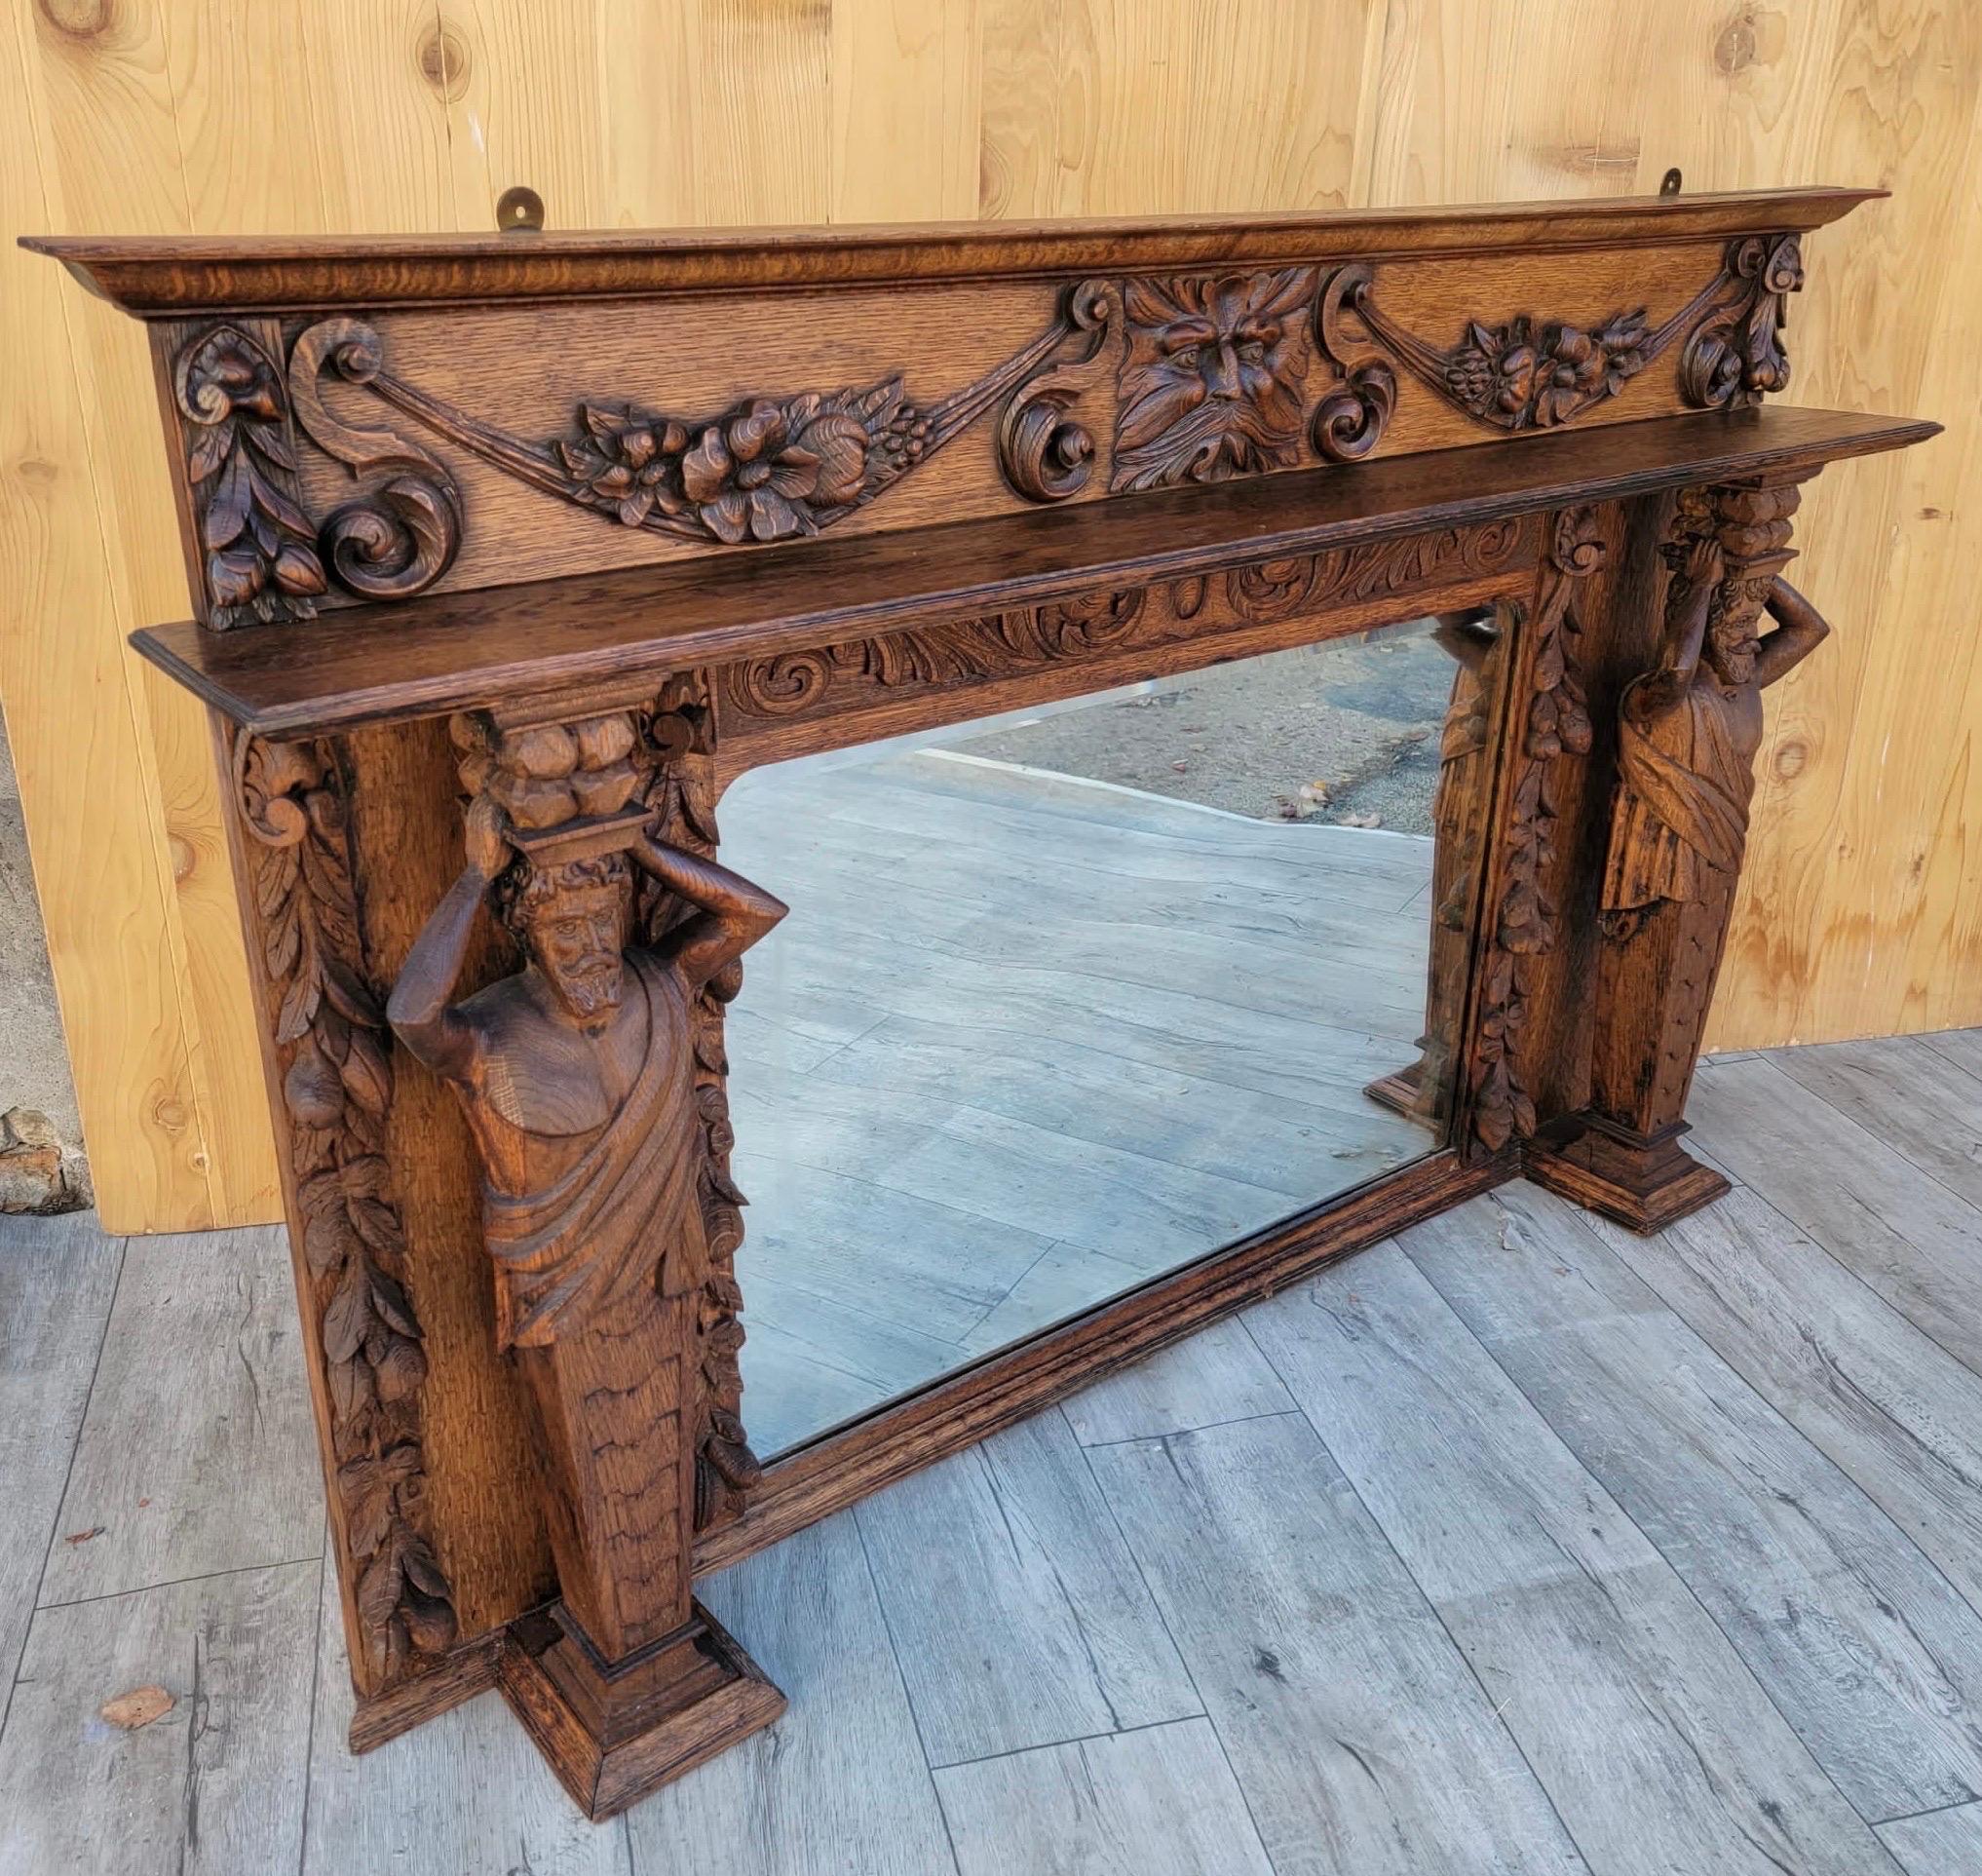 Antique Neoclassical Hand Carved Figural and Foliate Quarter-Sawn Fireplace Mantel Beveled Mirror Topper

Stunning 19th Century Neoclassical Hand Carved Finely Detailed Figural and Foliate Quarter-Sawn Oak Mantel Beveled Mirror Topper. 

This